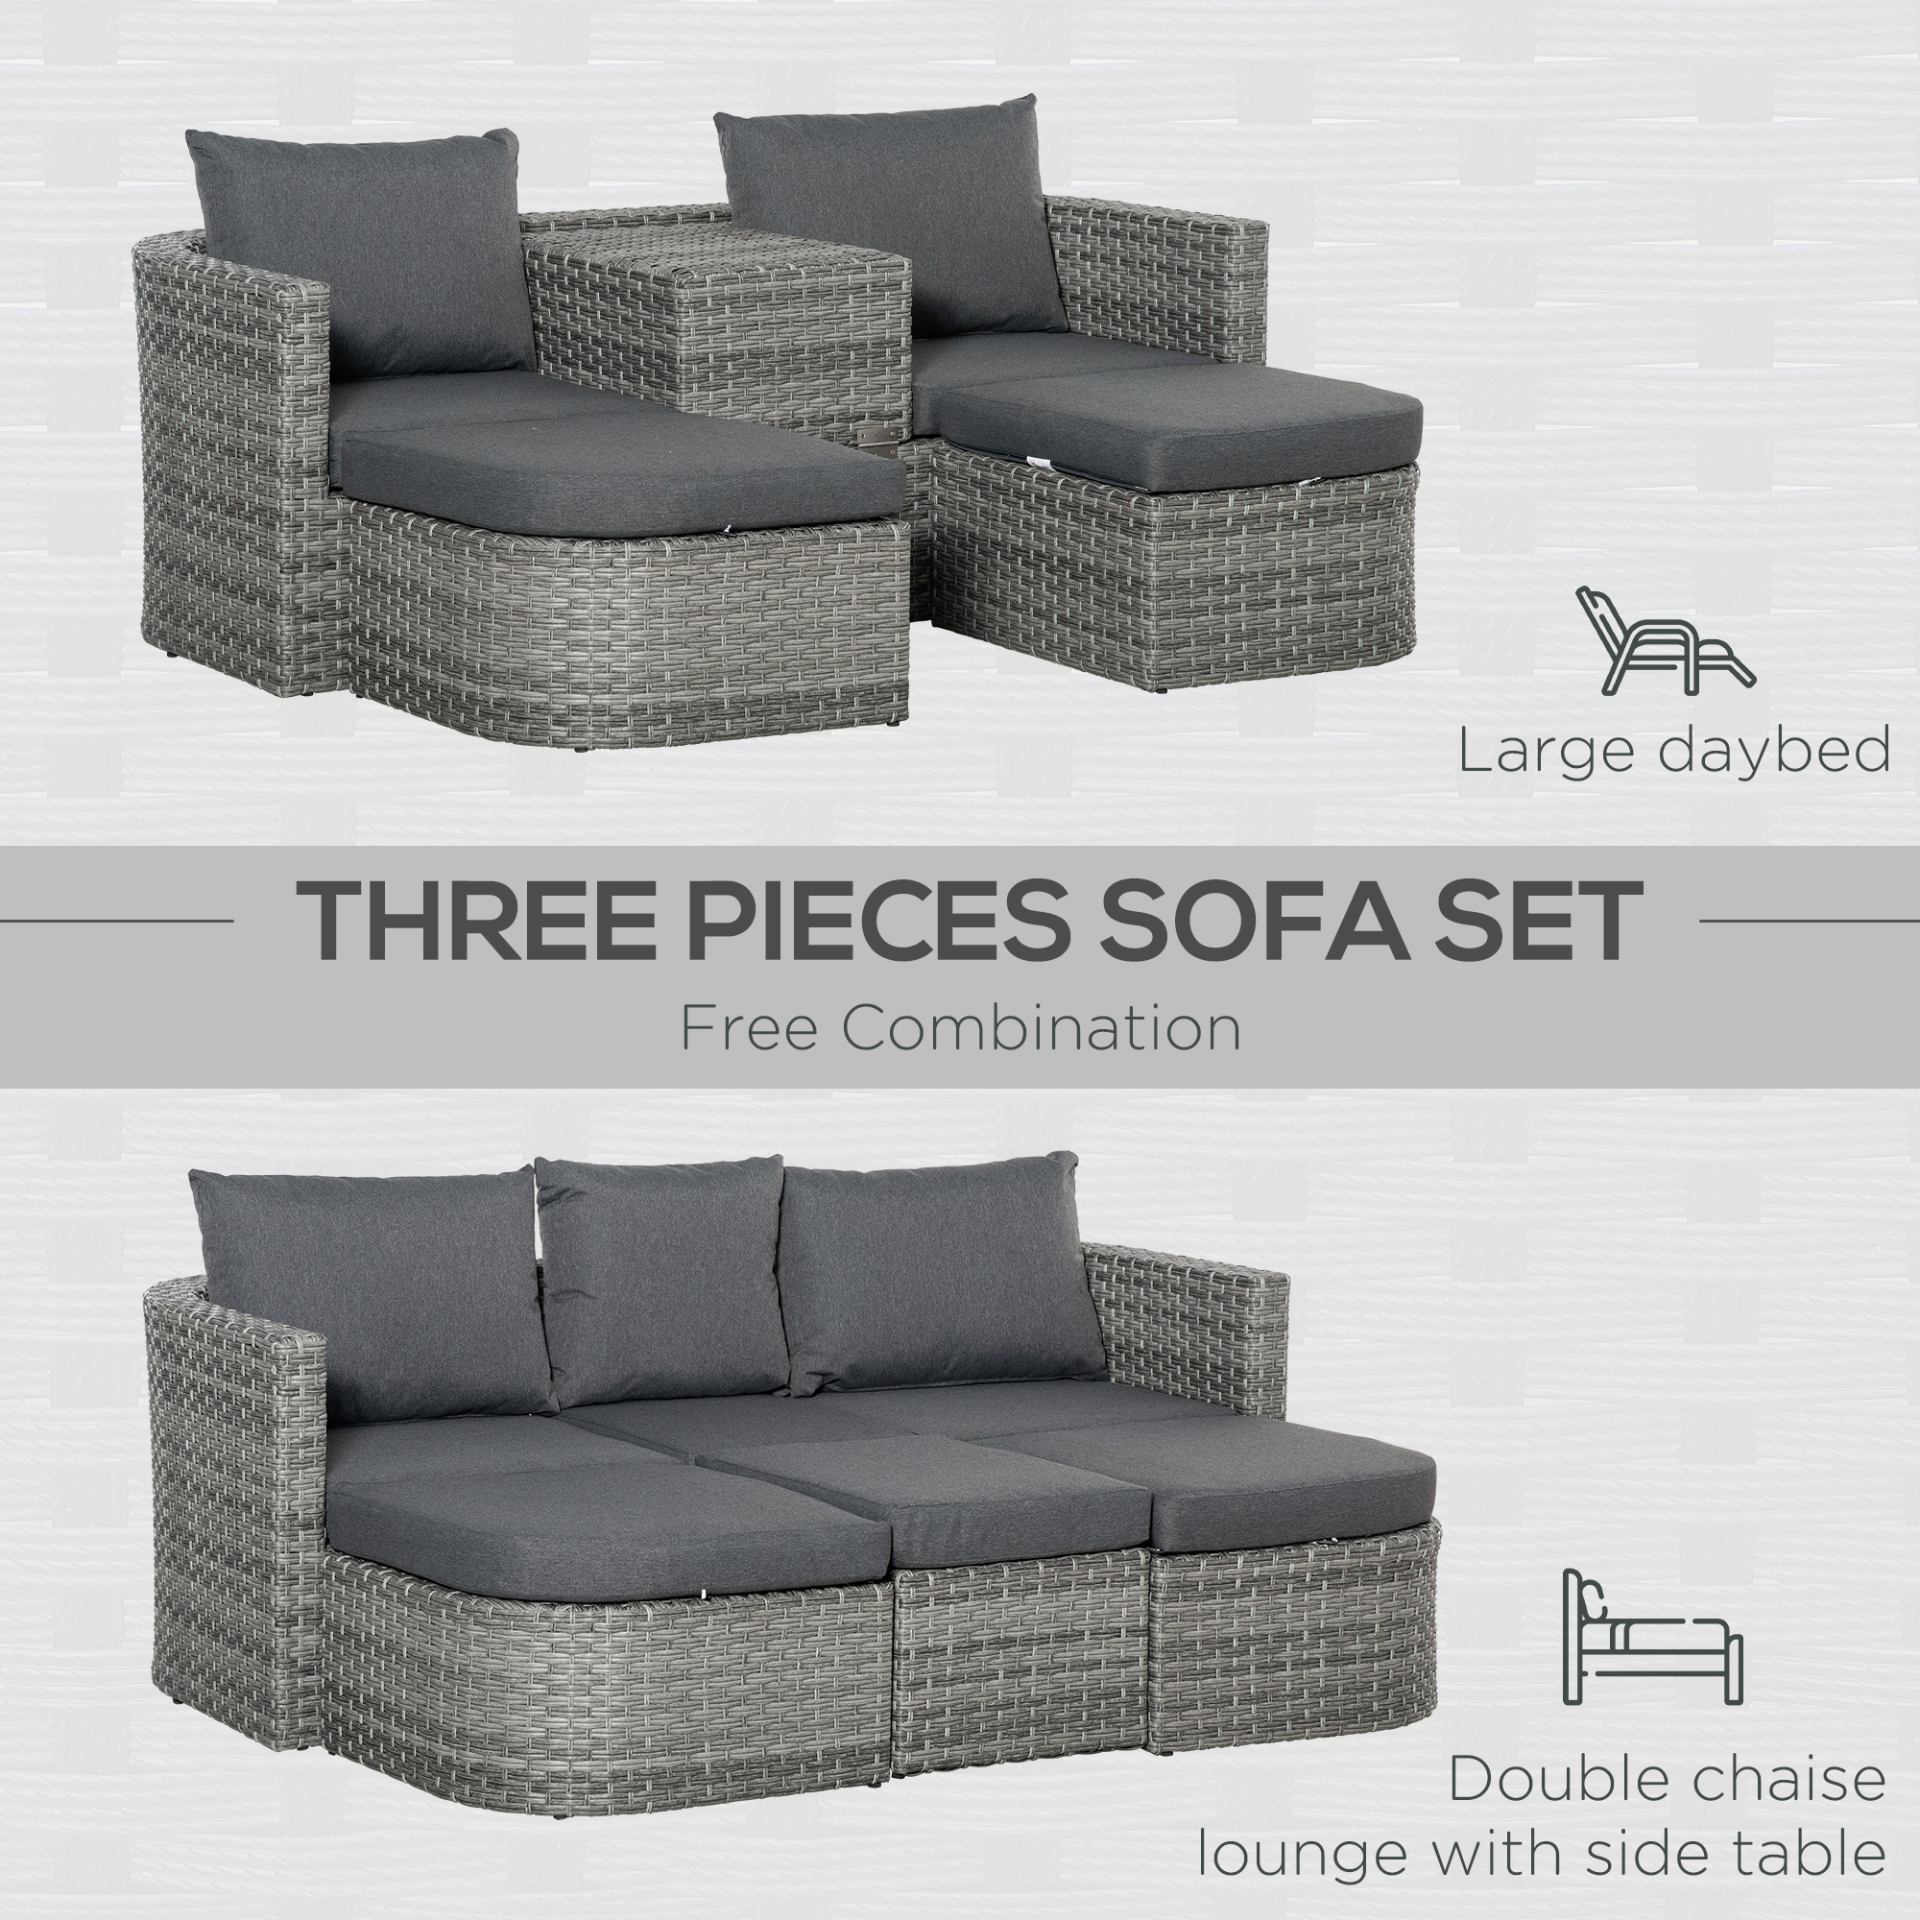 Outsunny Three Pieces Outdoor PE Rattan Sofa Set, Patio Wicker Conversation Double Chaise Lounge Furniture Set w/ Side Table, Large Daybed w/ Cushion, Mixed Grey